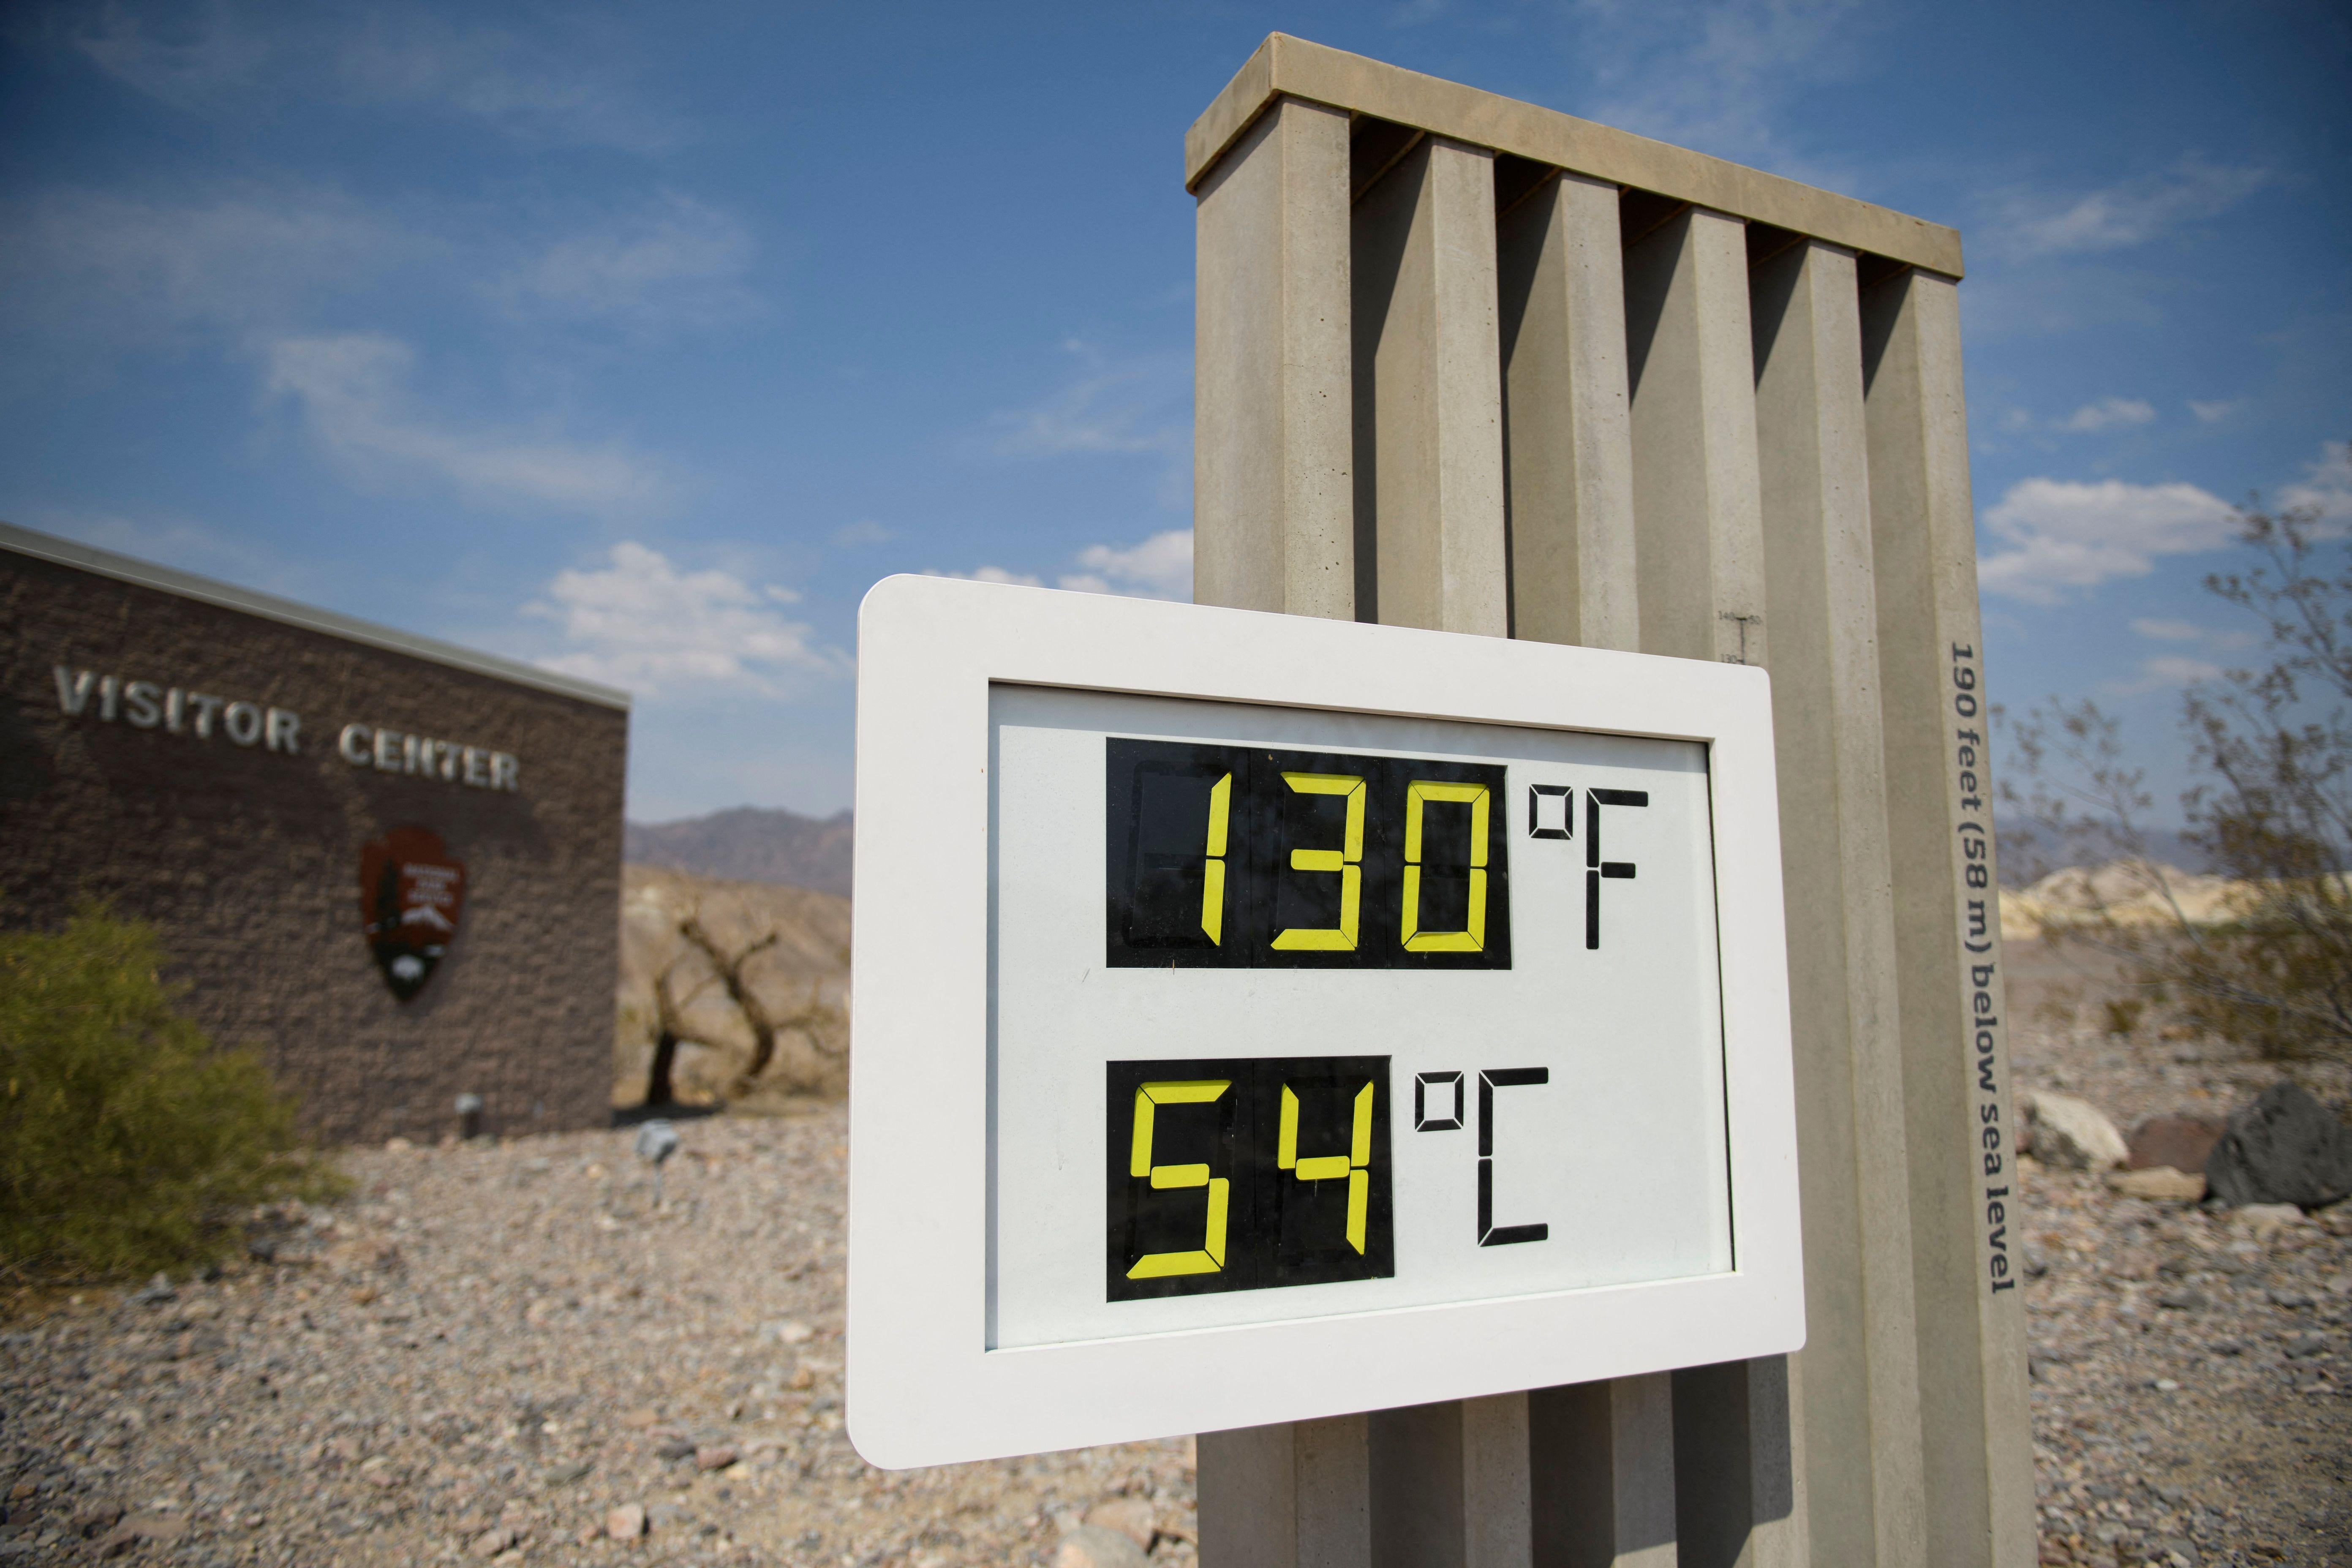 An outdoor thermometer reads 130 degrees Fahrenheit and 54 degrees Celsius.